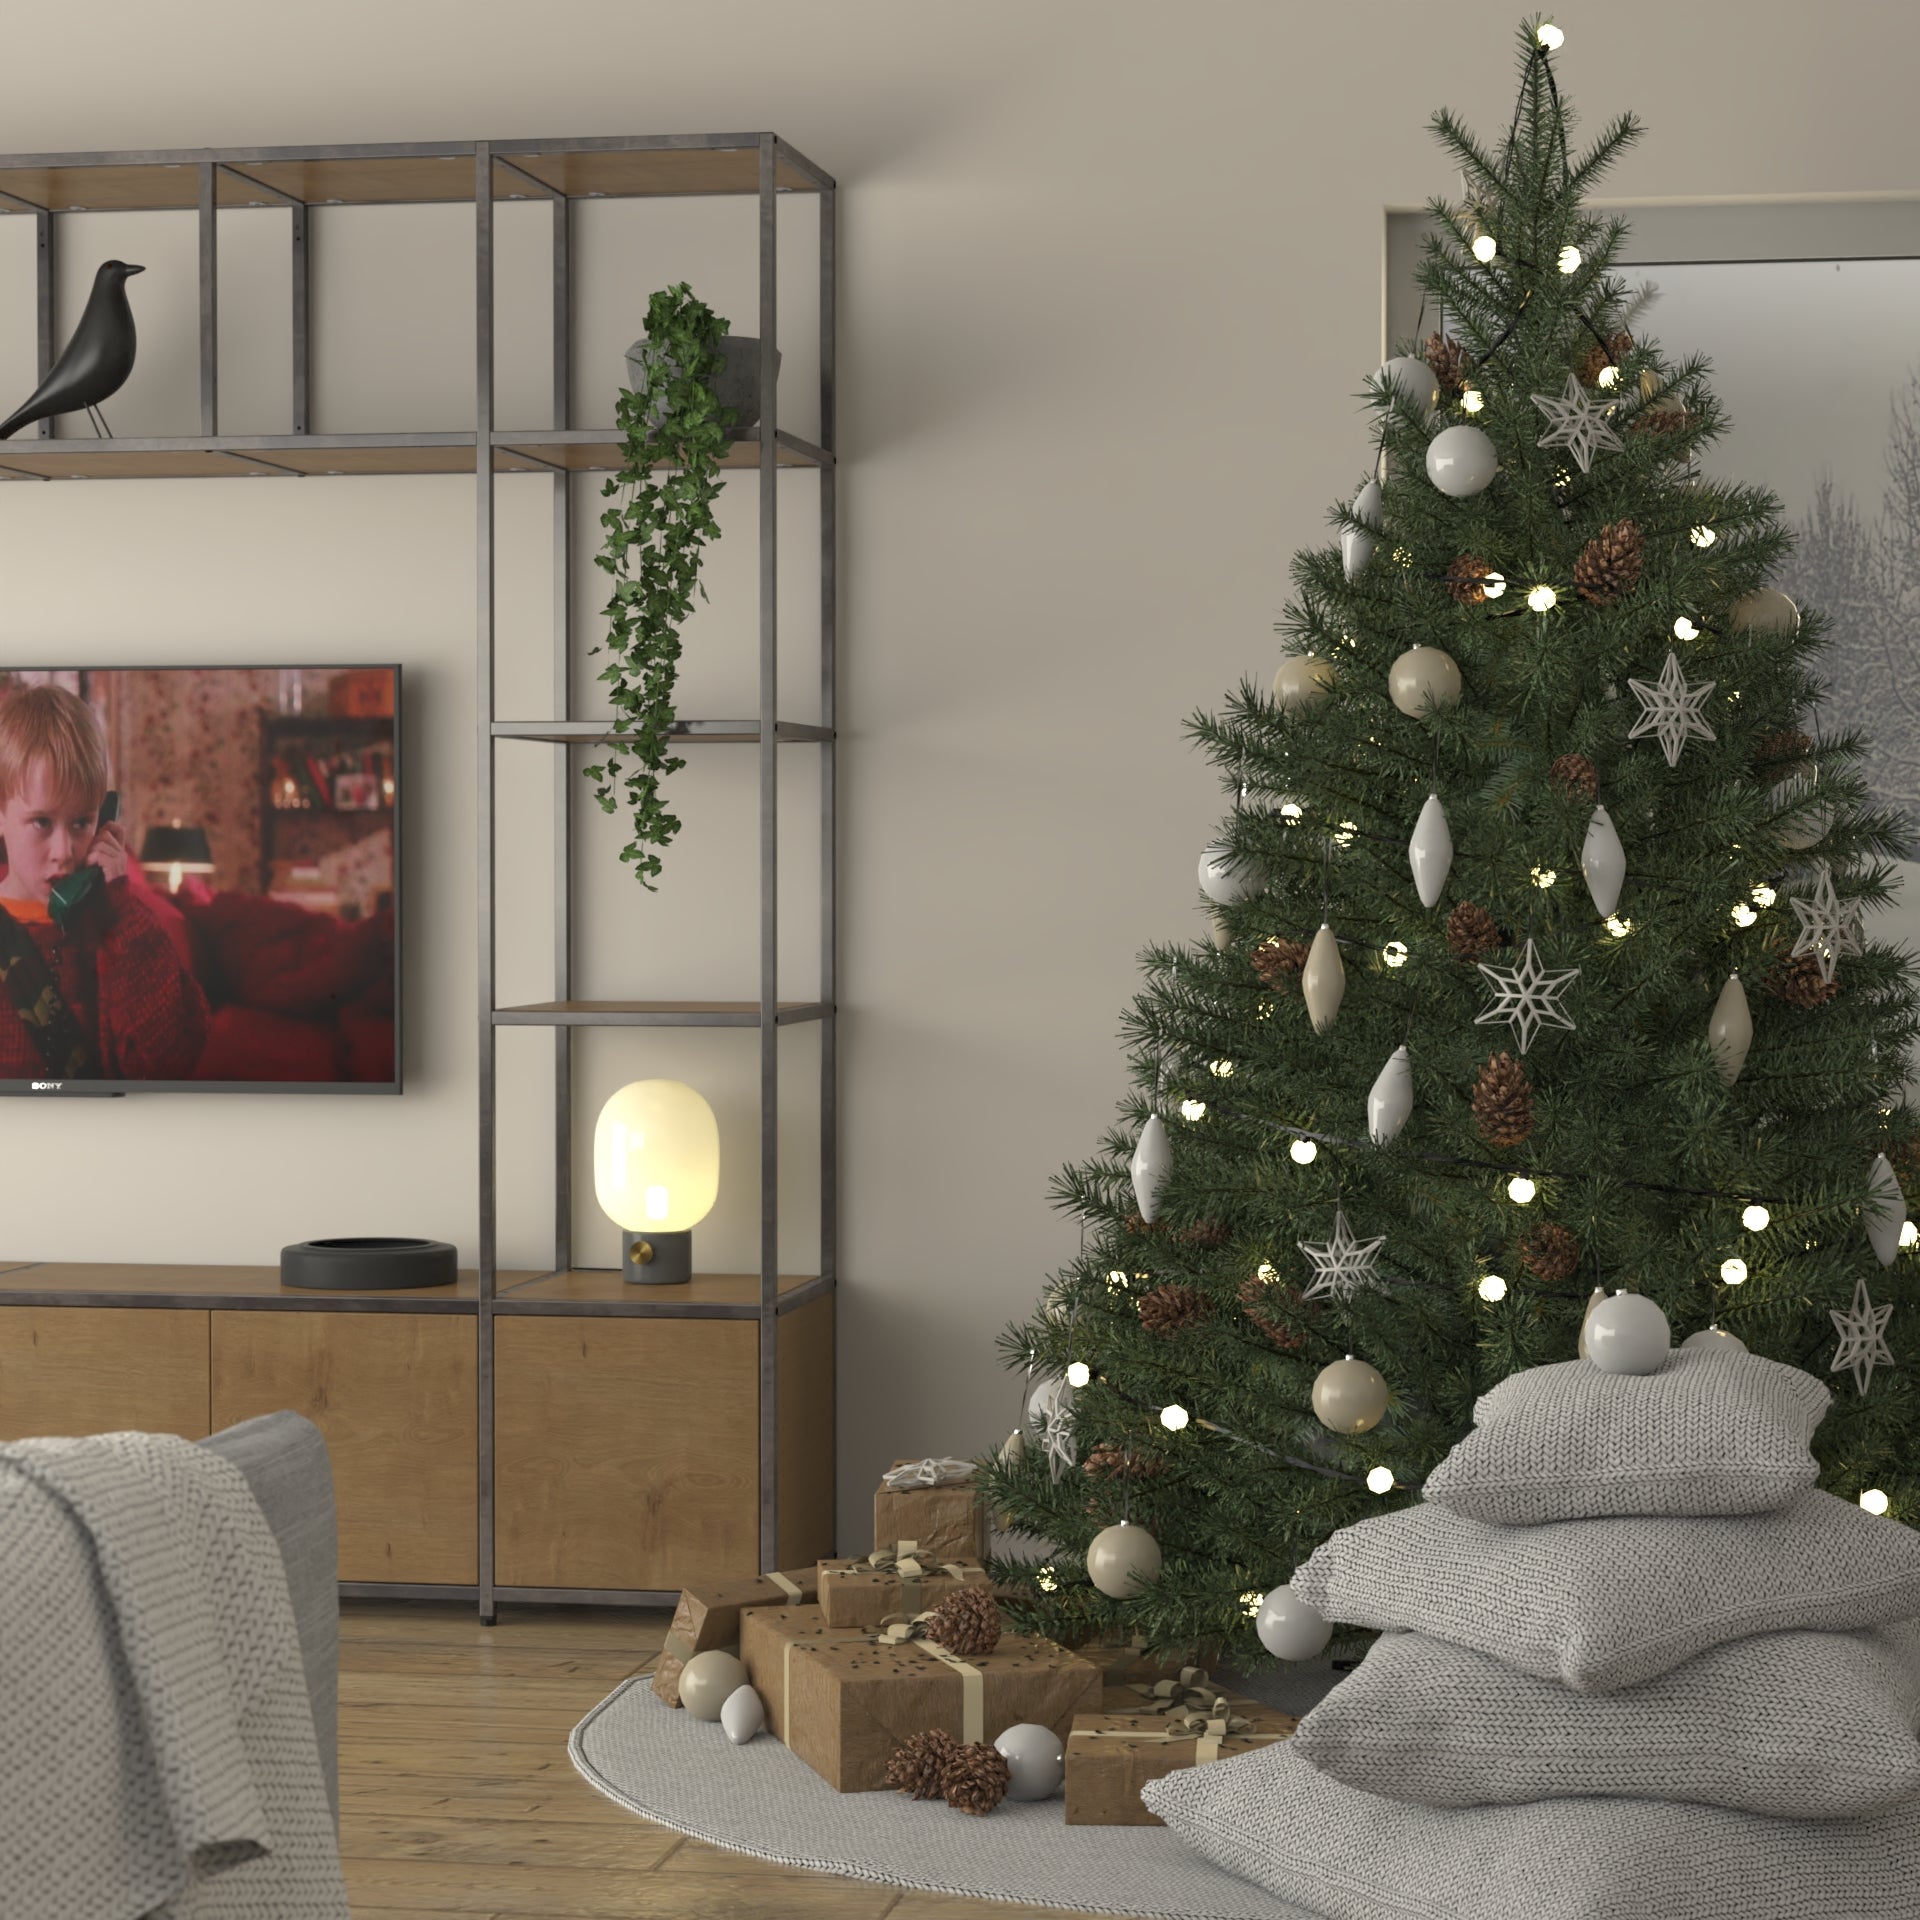 How to Decorate Your Shelves for Christmas